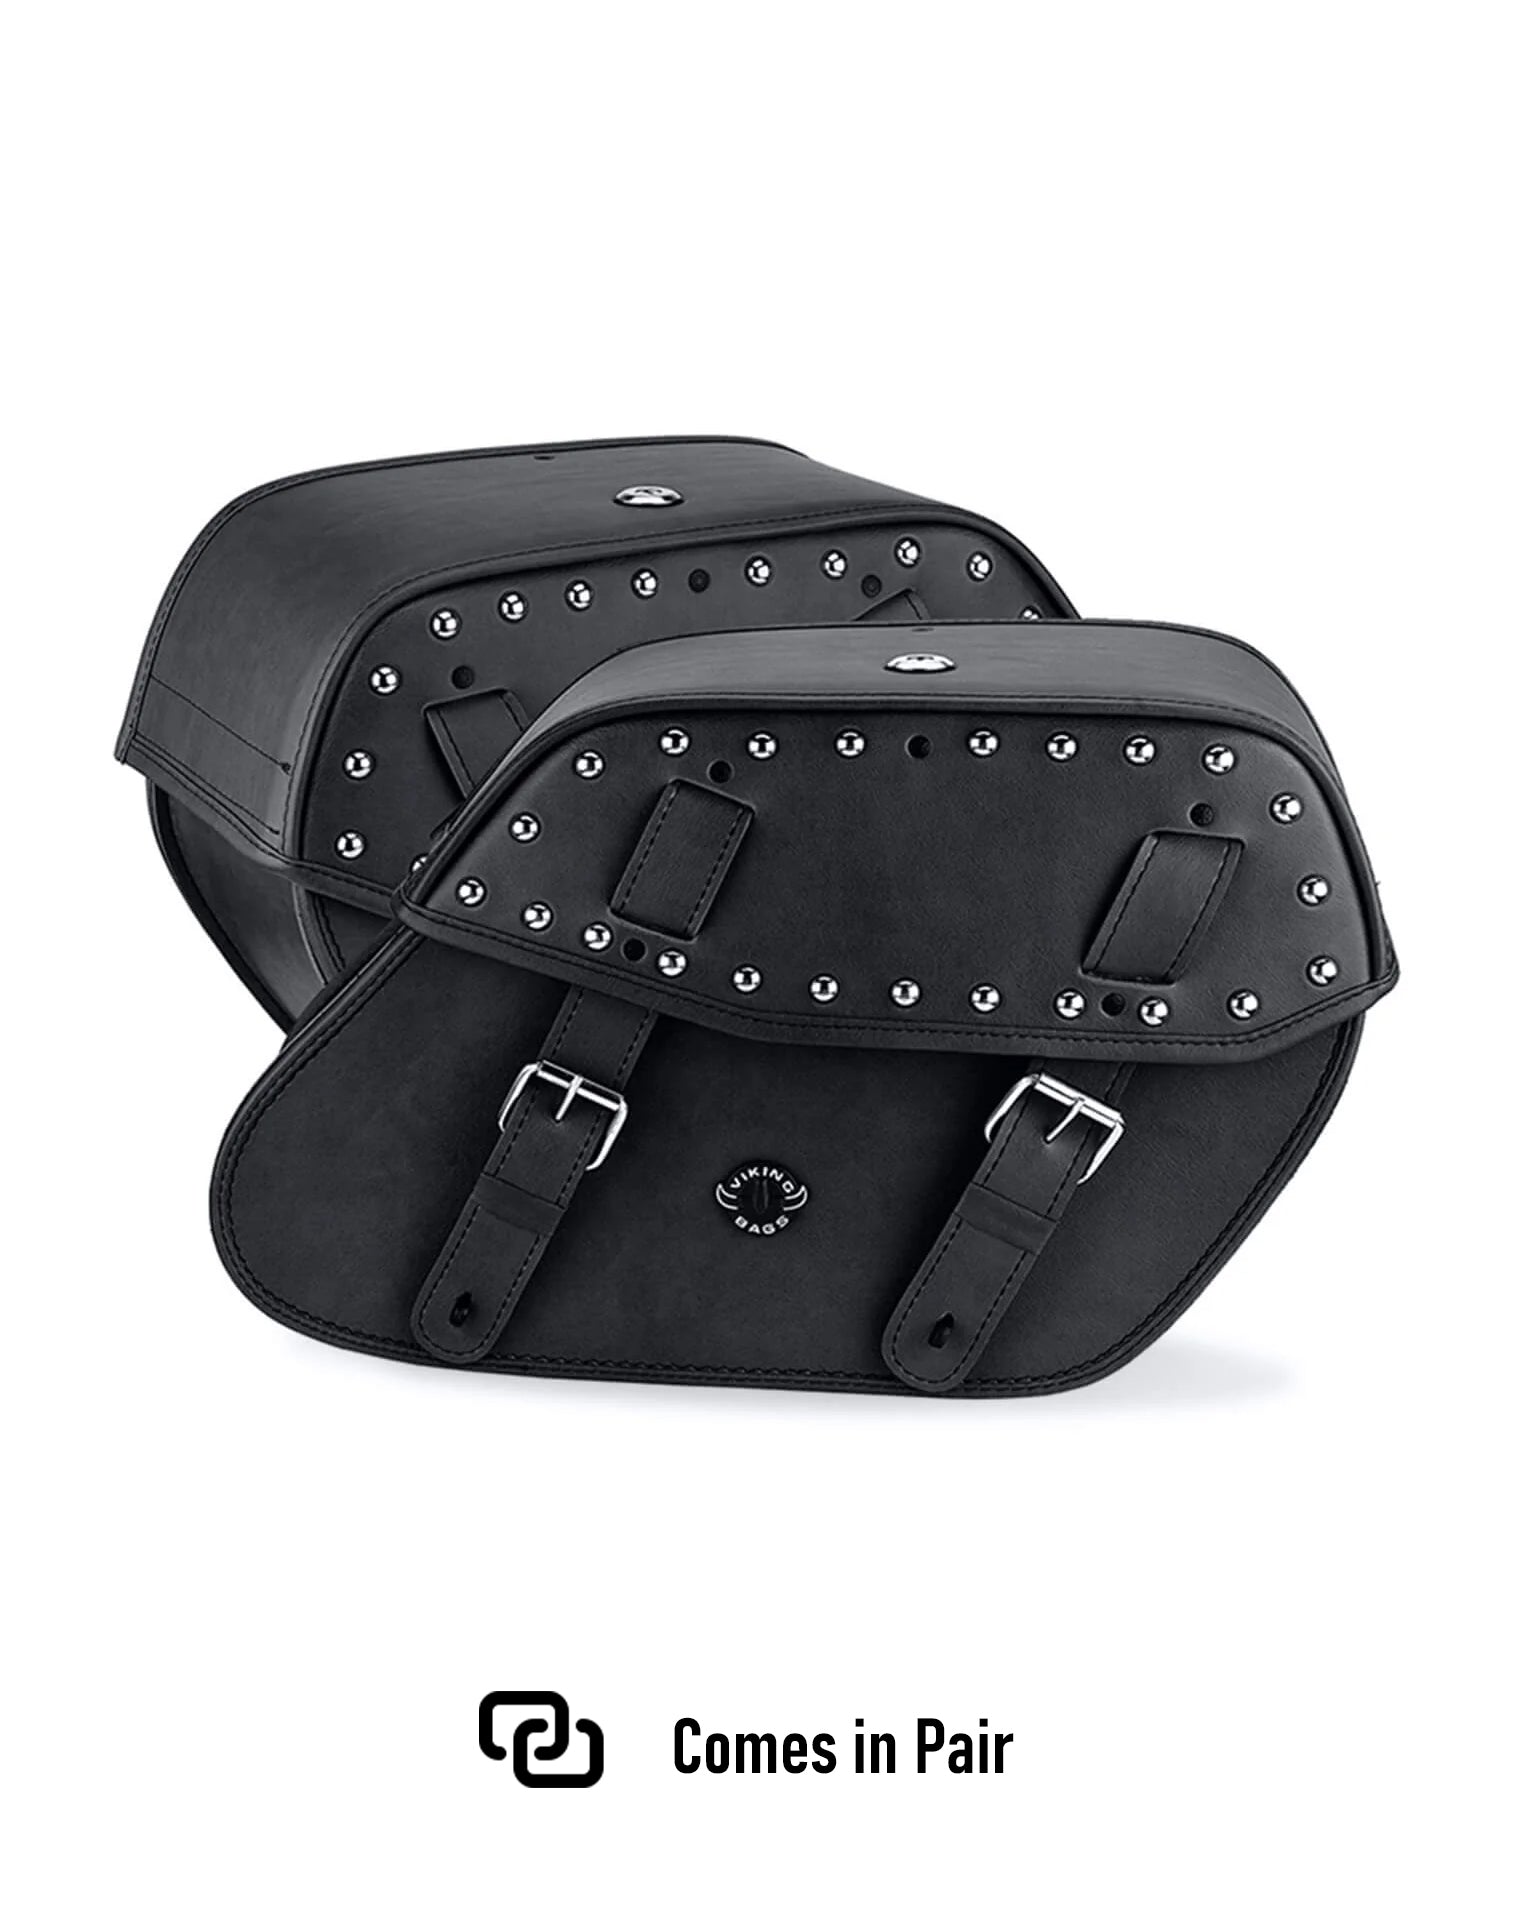 Viking Odin Large Suzuki Intruder 1500 Vl1500 Leather Studded Motorcycle Saddlebags Weather Resistant Bags Comes in Pair